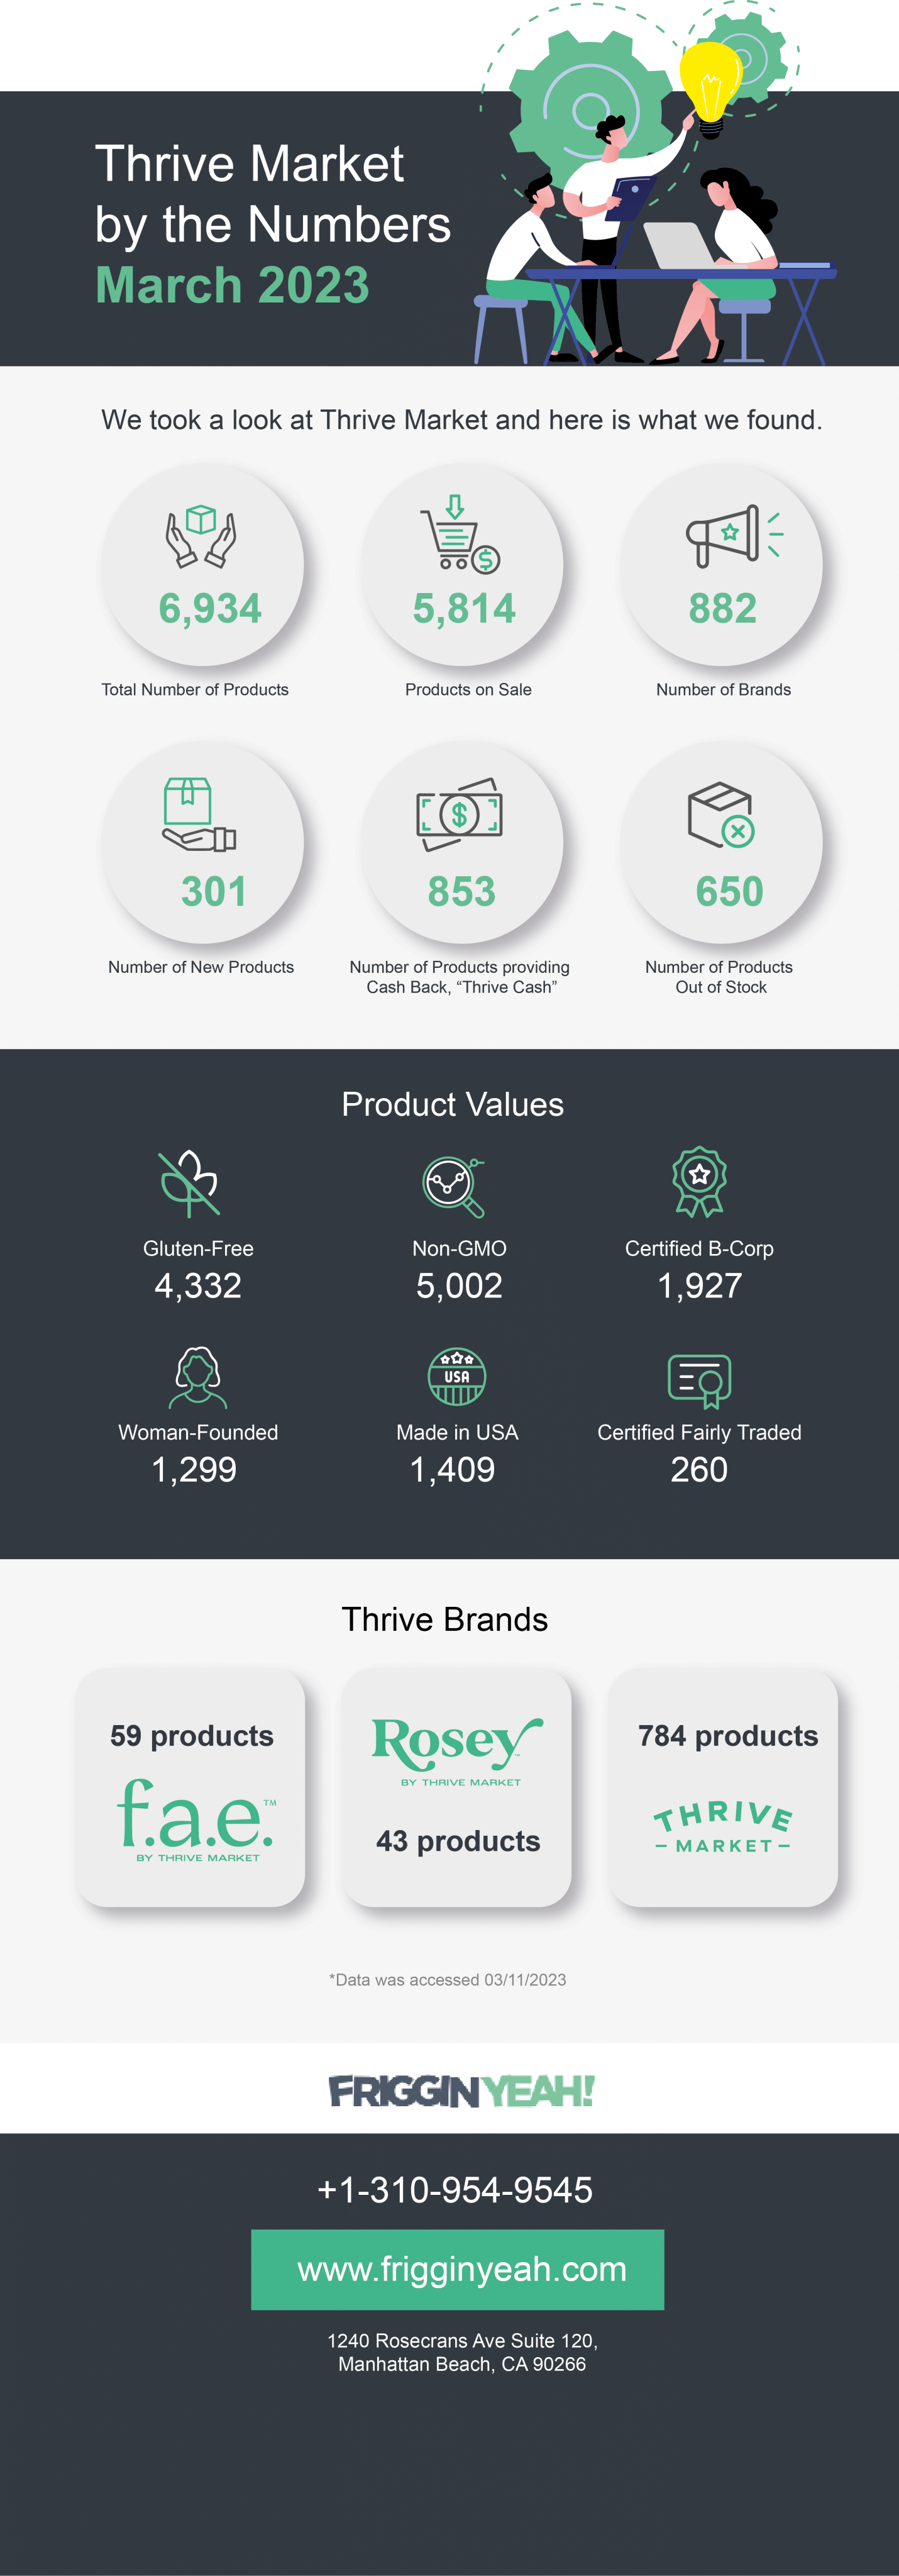 Thrive Market by the Numbers March 2023